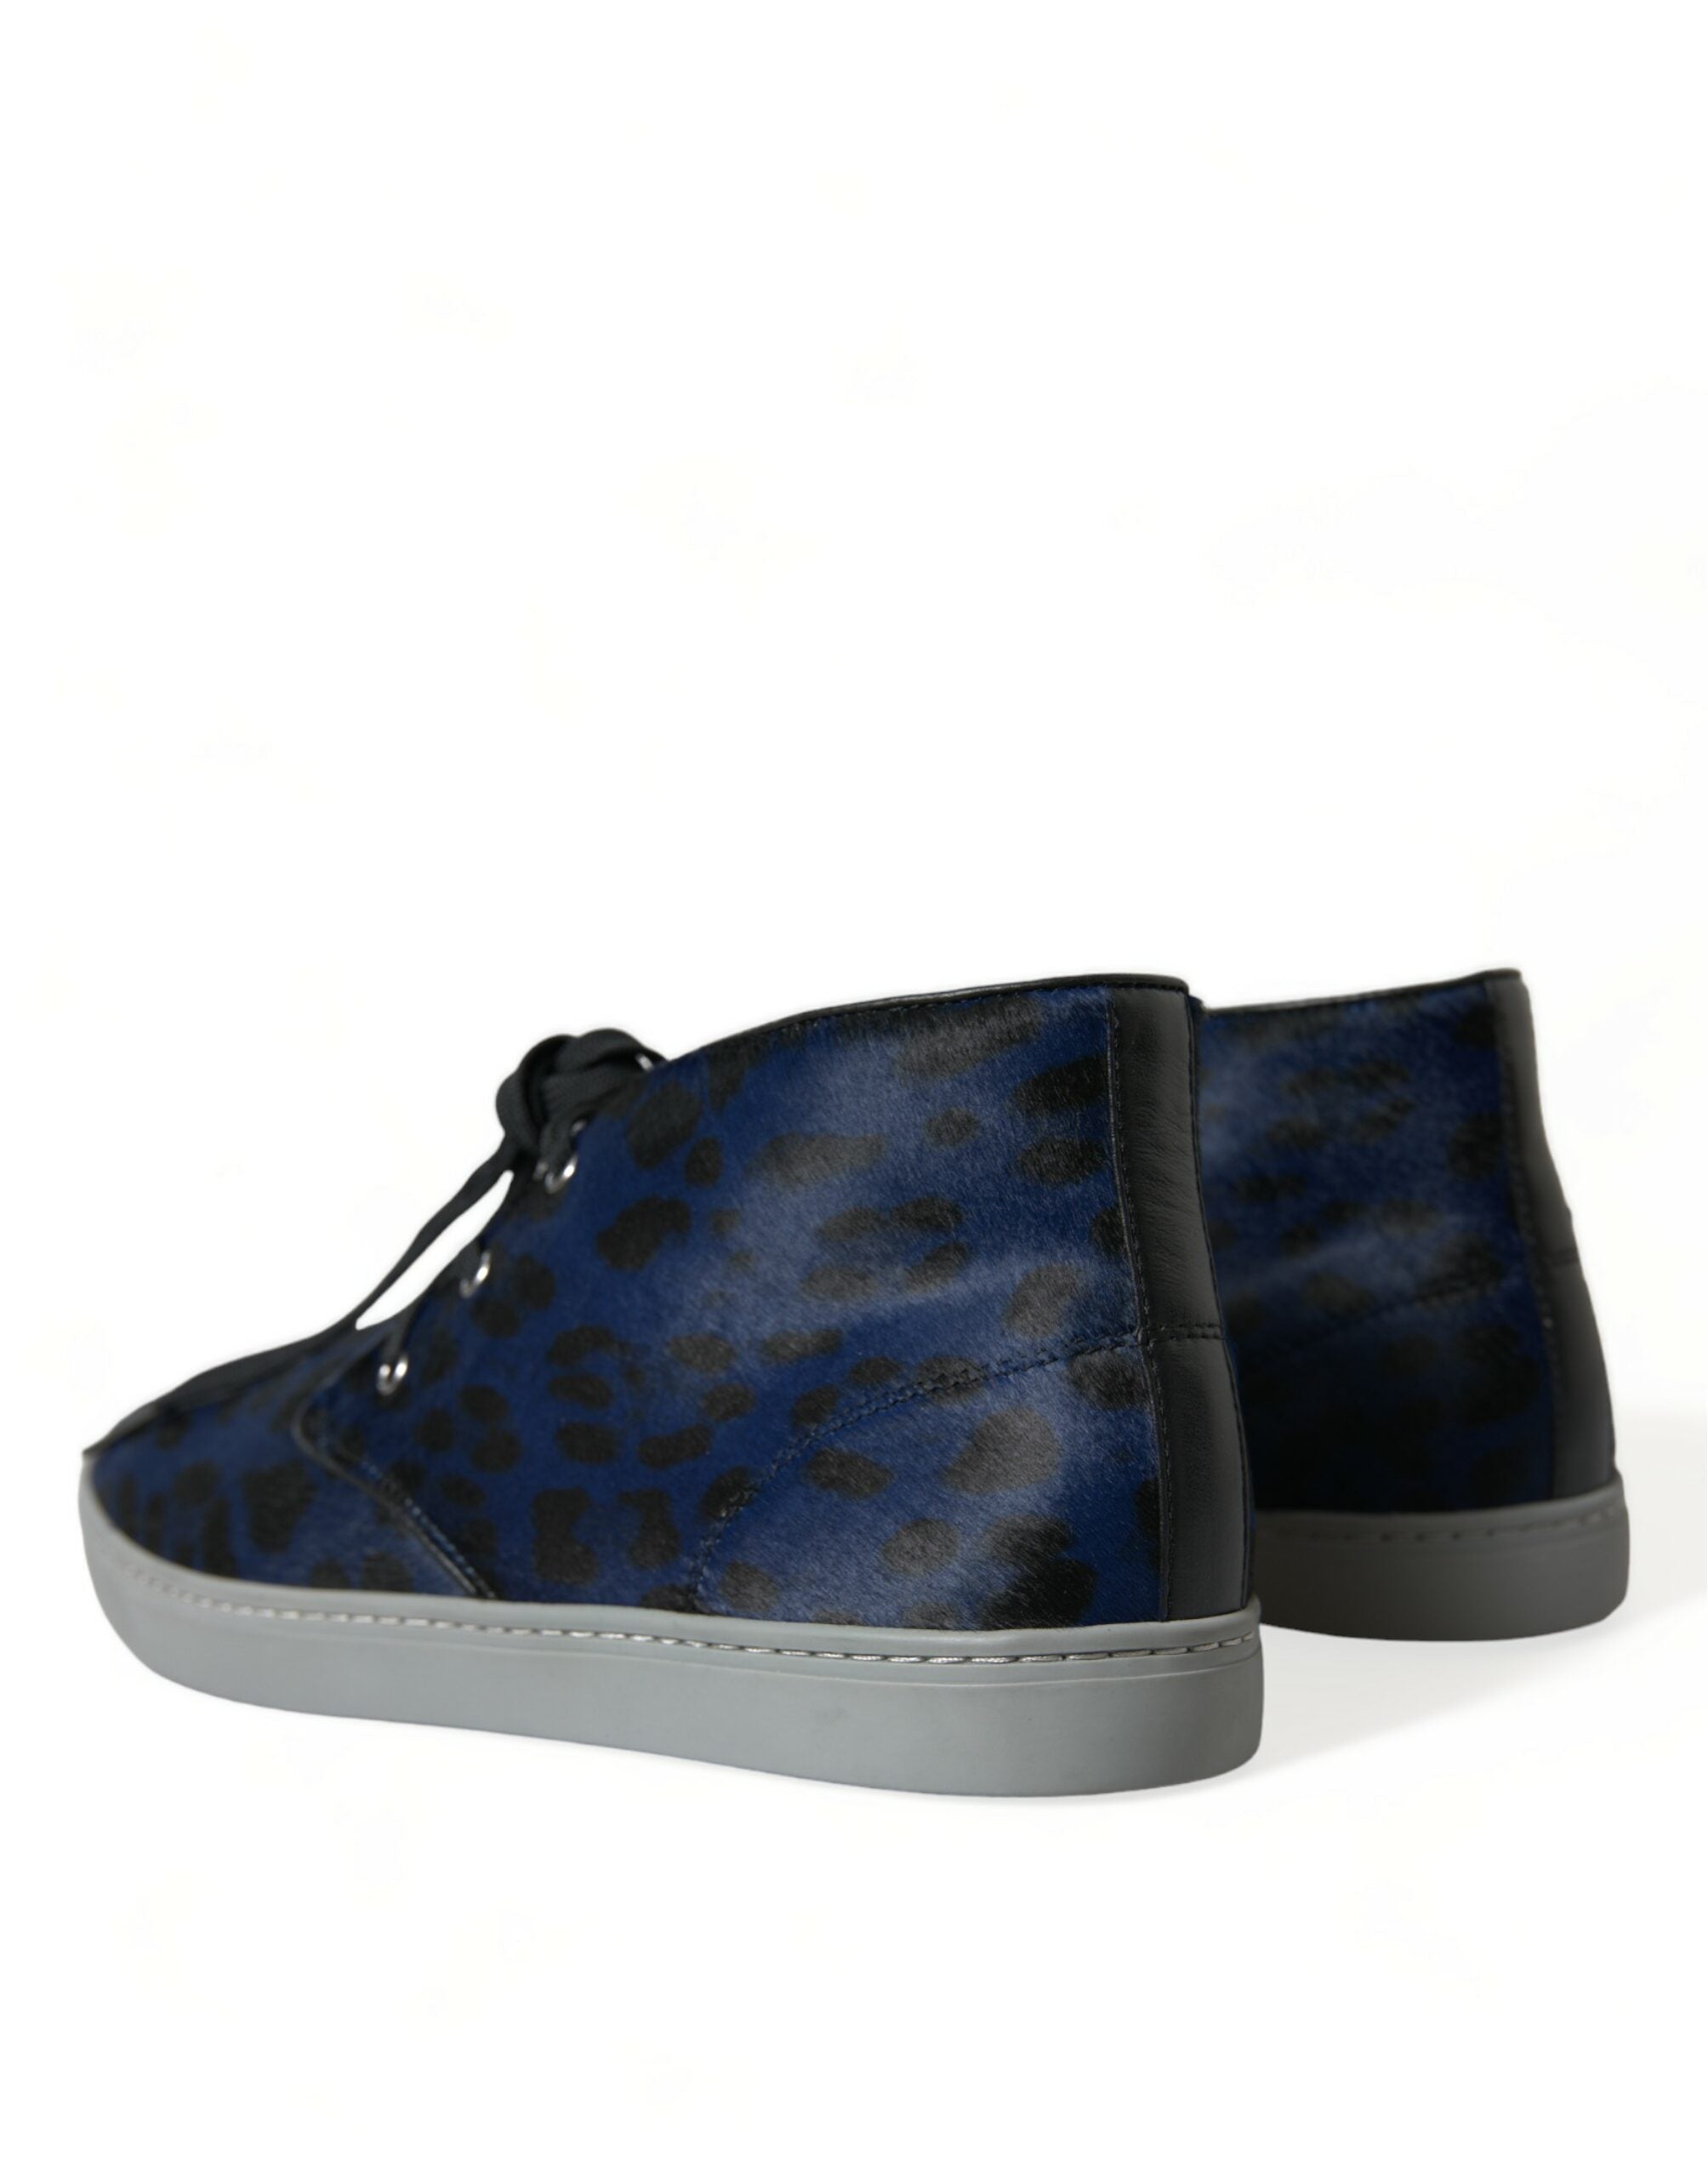 Dolce & Gabbana Chic Blue Leopard Print Mid-Top Sneakers